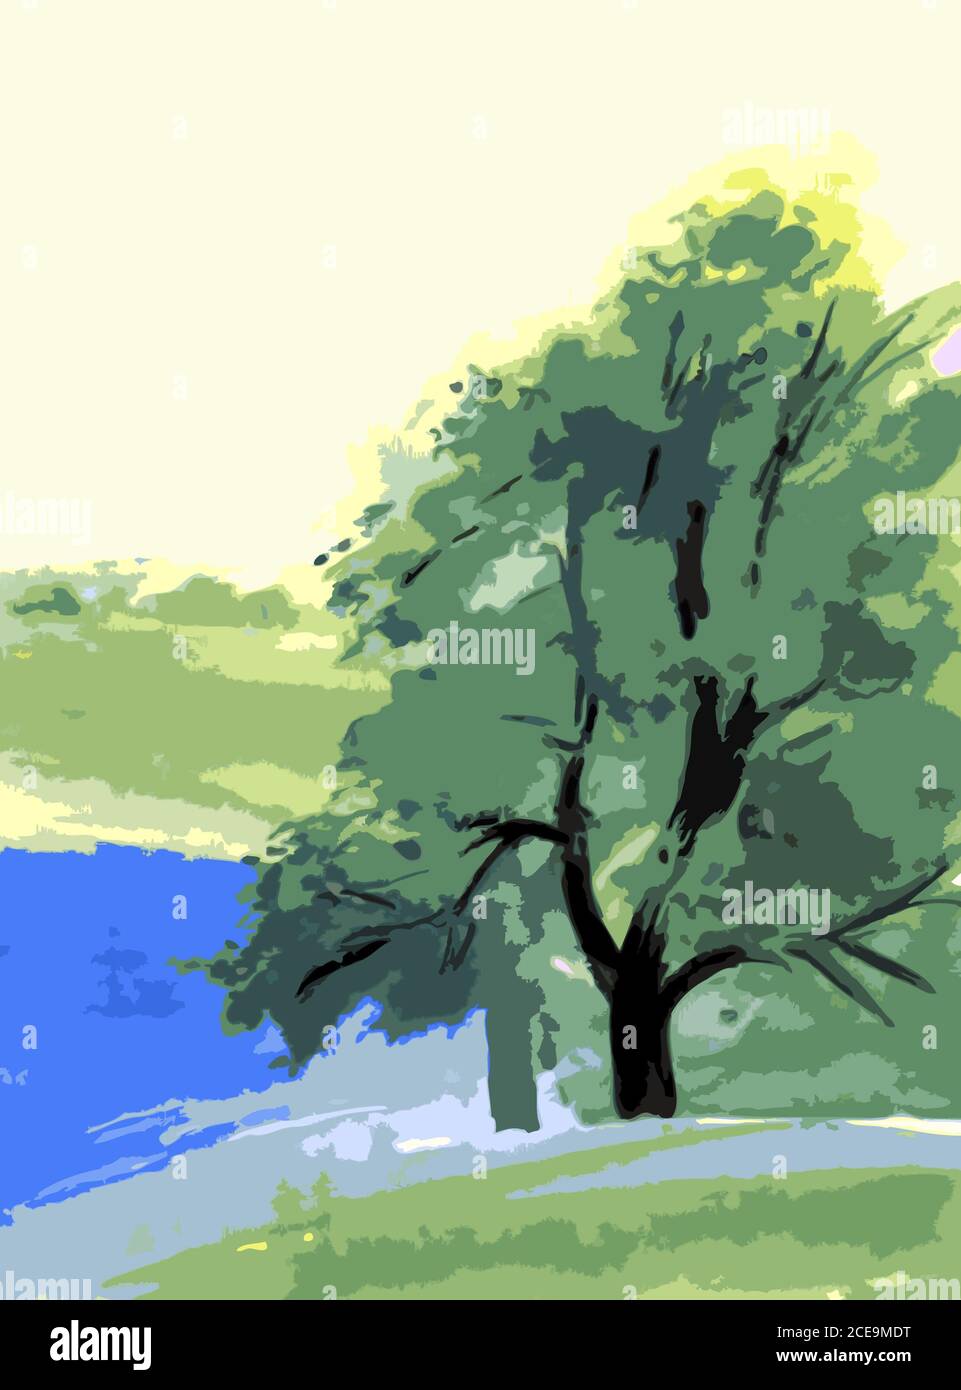 simple drawing summer landscape Stock Photo